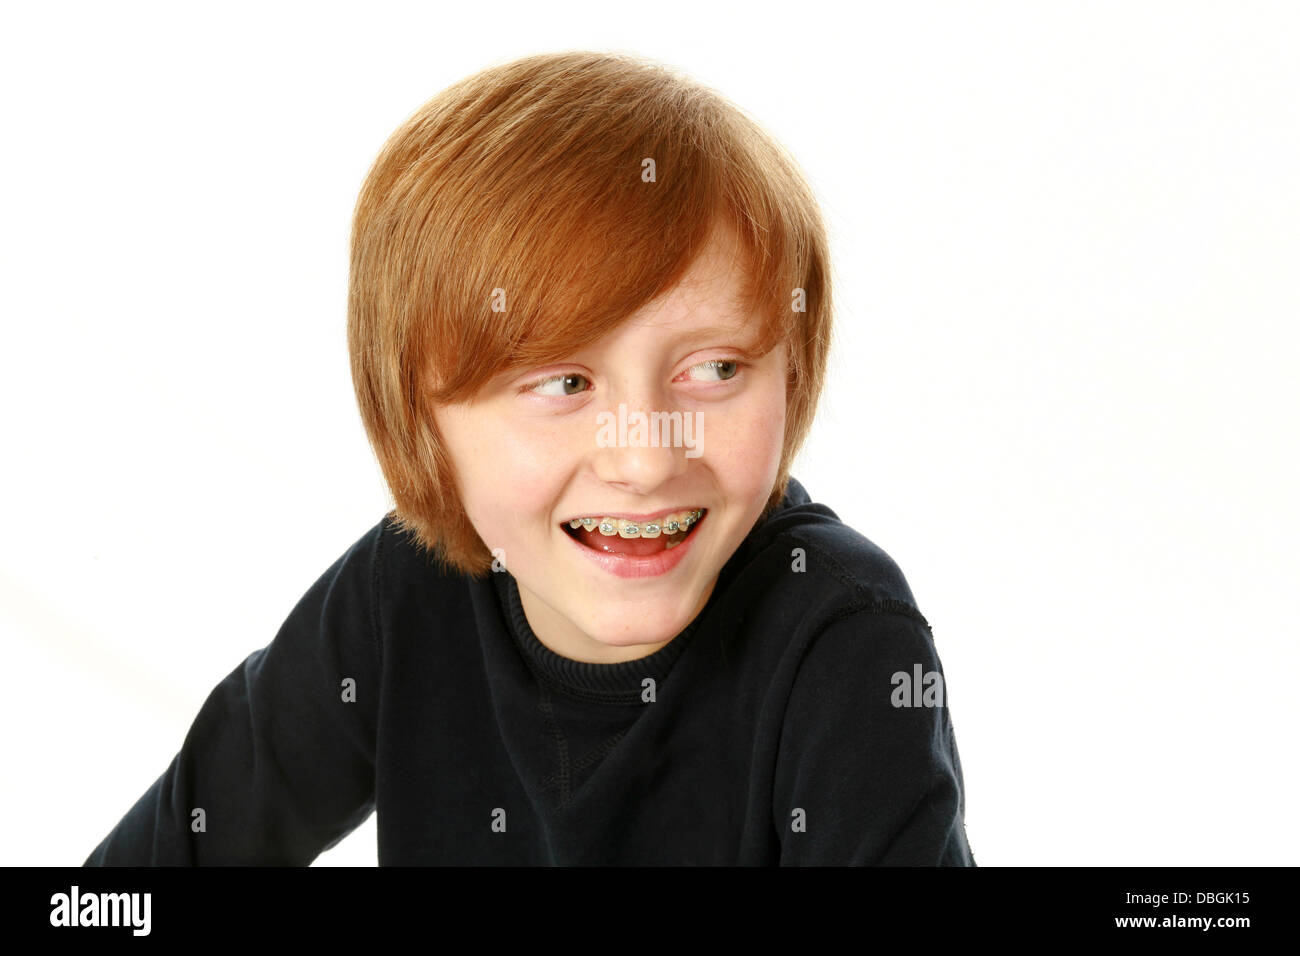 portrait of smiling redhead boy with braces isolated on white Stock Photo